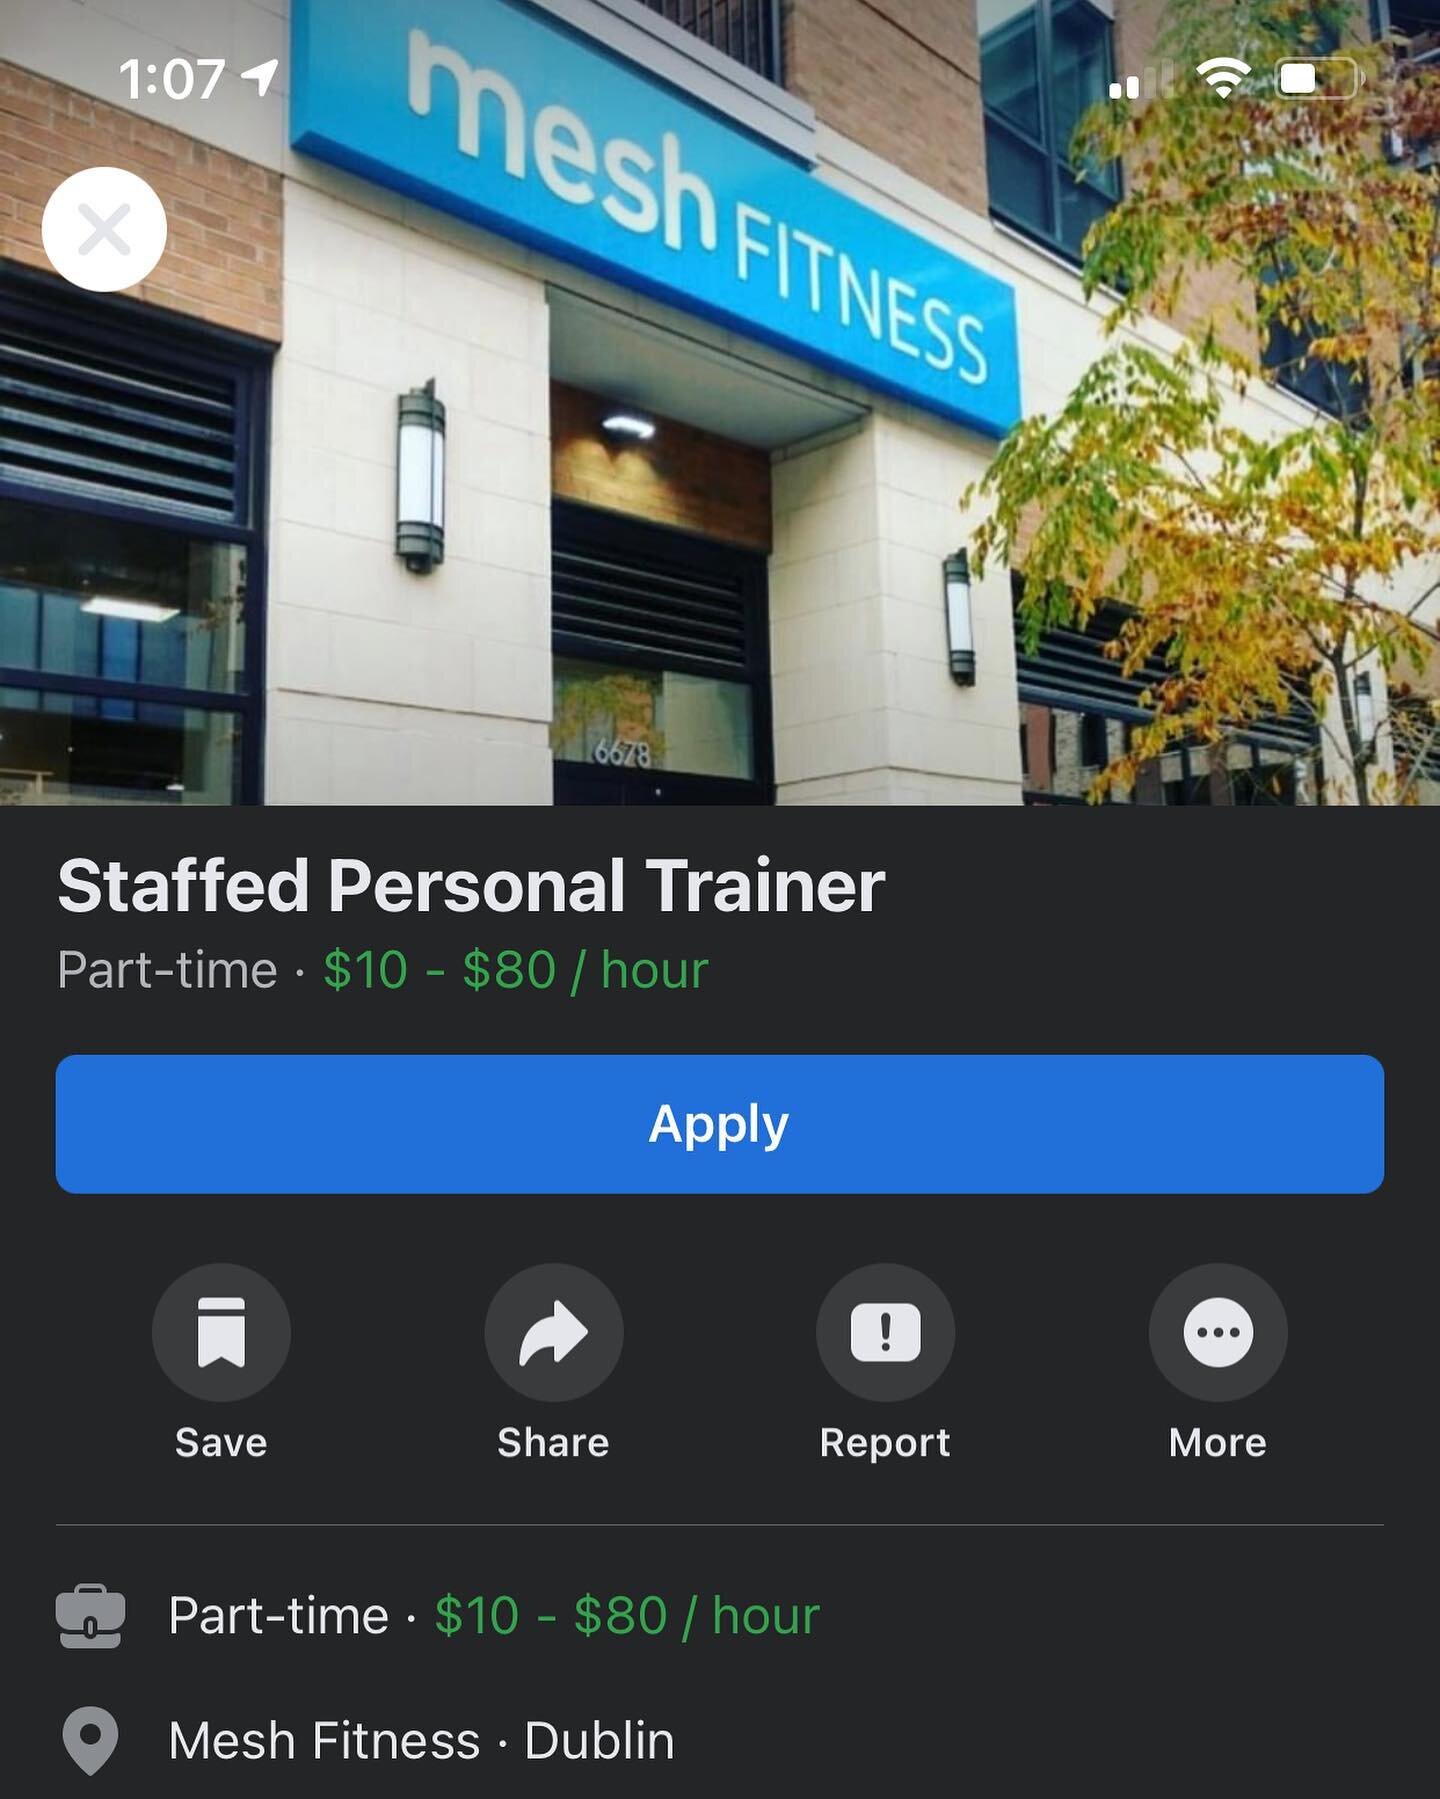 We are looking for 1-3 trainers to add to our team! If you are a local trainer or know a local trainer looking to move and grow their business, read below or tag your trainer so they can see this!

We offer aggressive floor rates or percentage based 